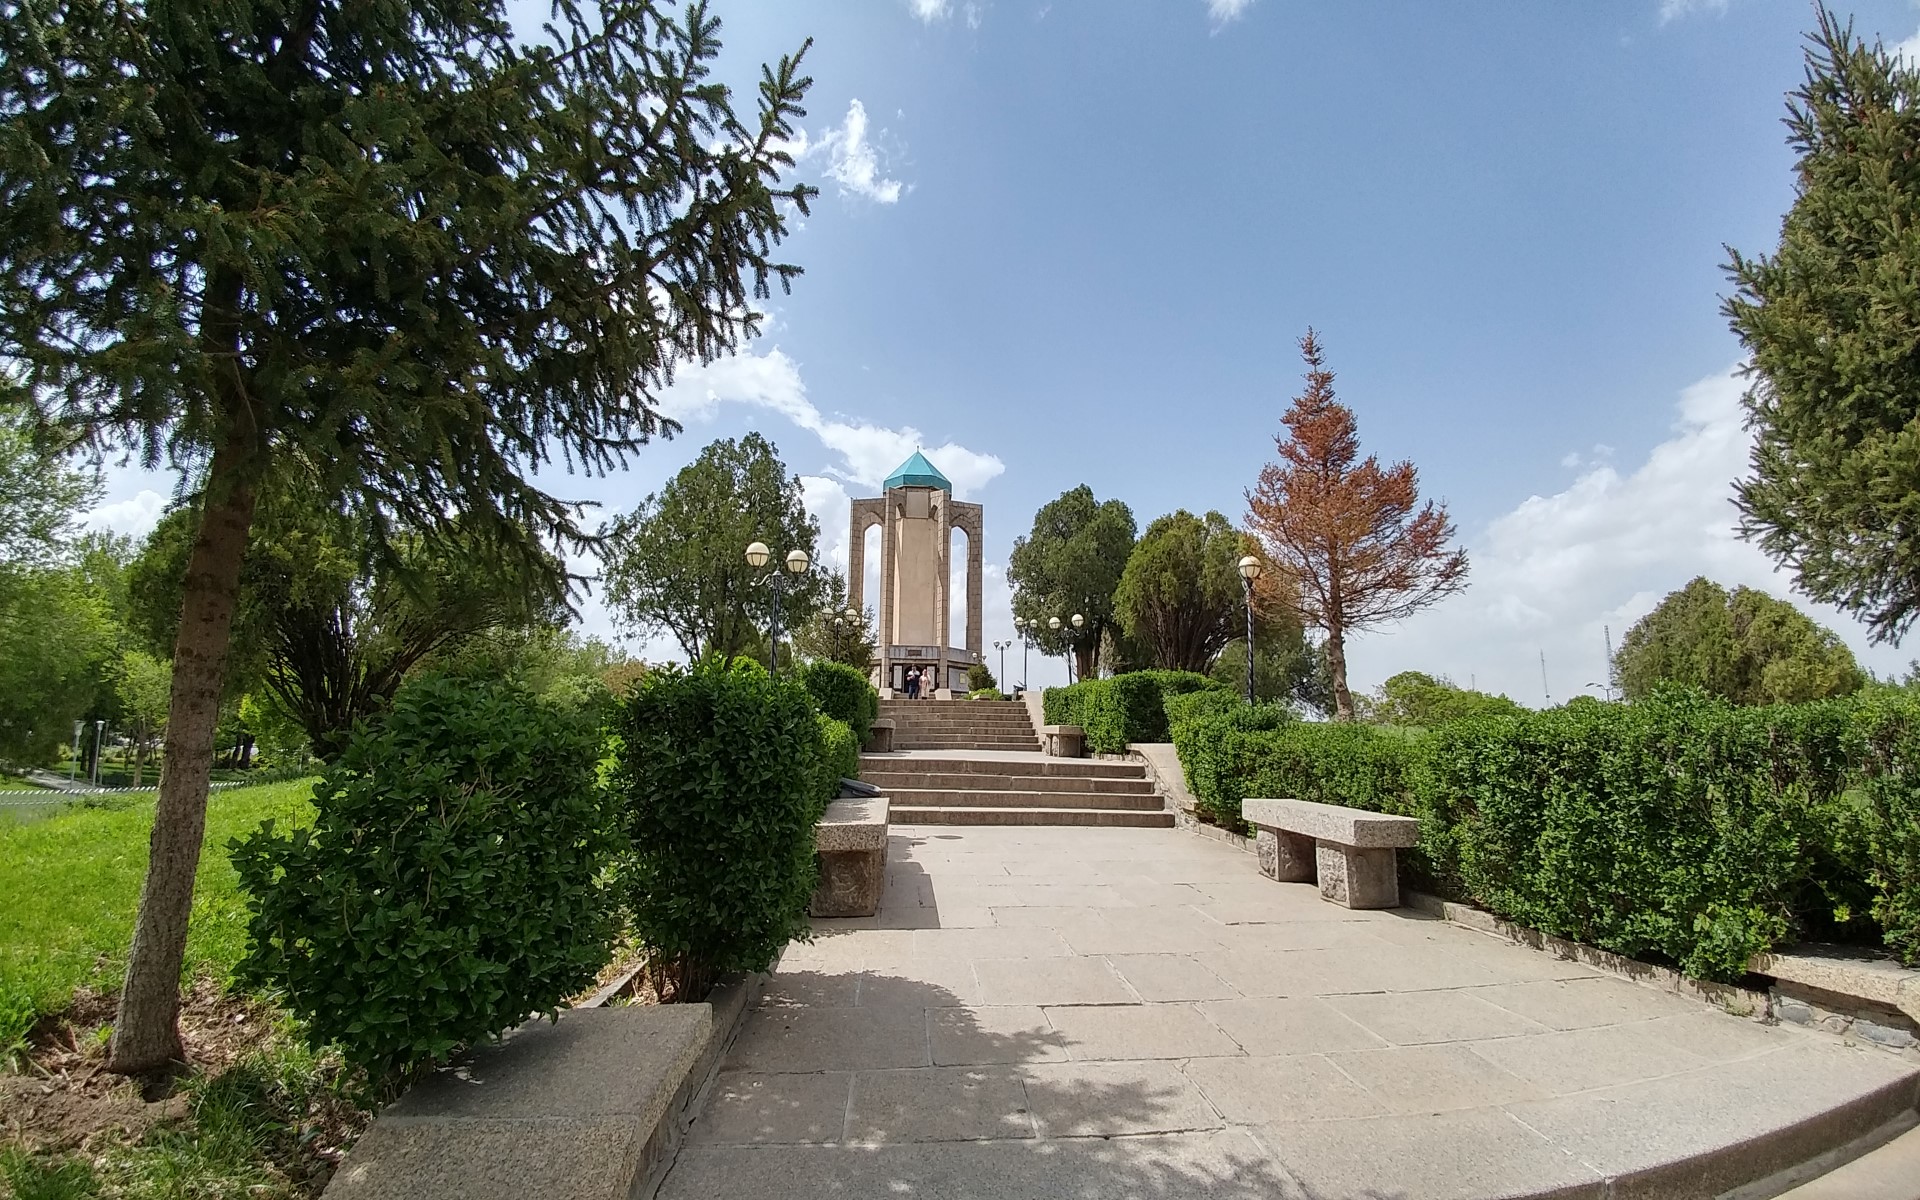 Tomb,Of,Baba,Taher,,Hamedan,,Iran,This,Tomb,Is,A